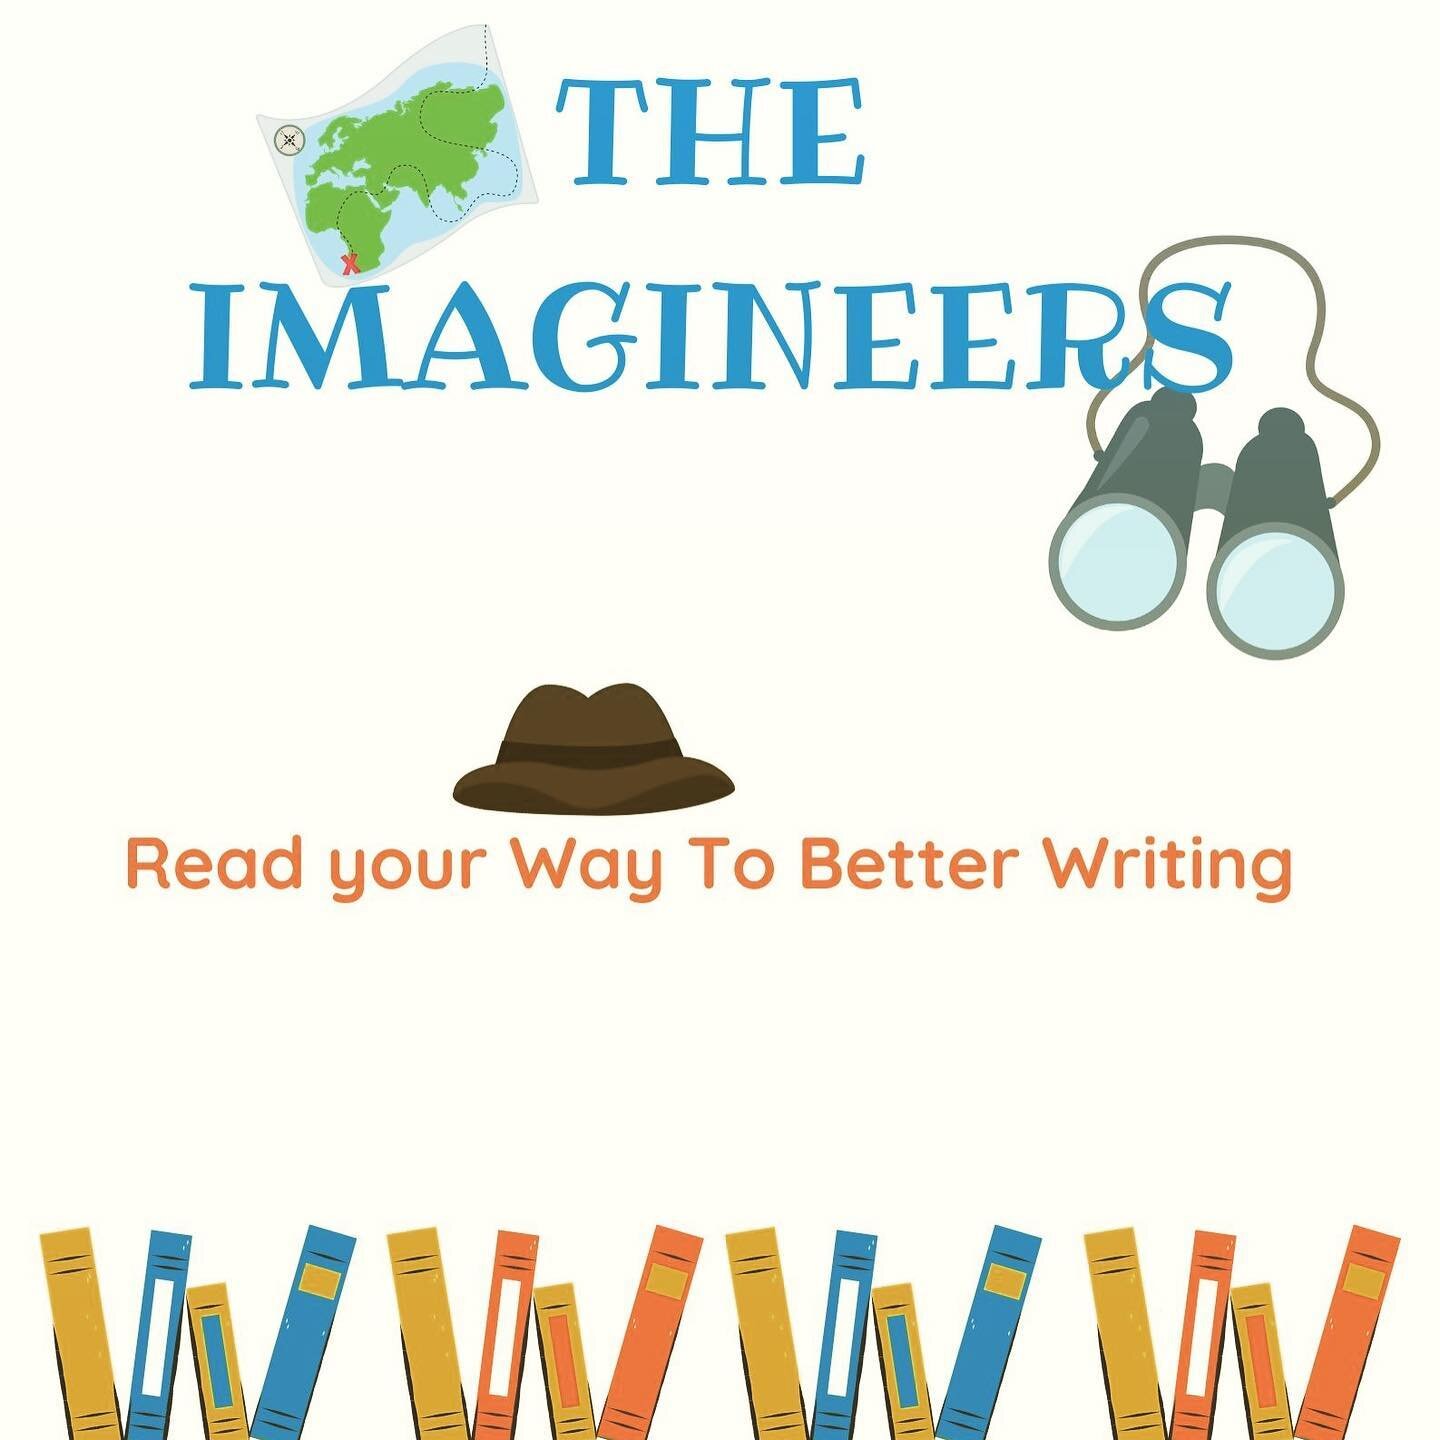 The Imagineers is now open for bookings. Our program for March 2021 is going to be fab! Our book is Mr. Stink by David Walliams. There&rsquo;s even a reading challenge to get young readers tracking their reading habits! And an extra Zoom storytelling